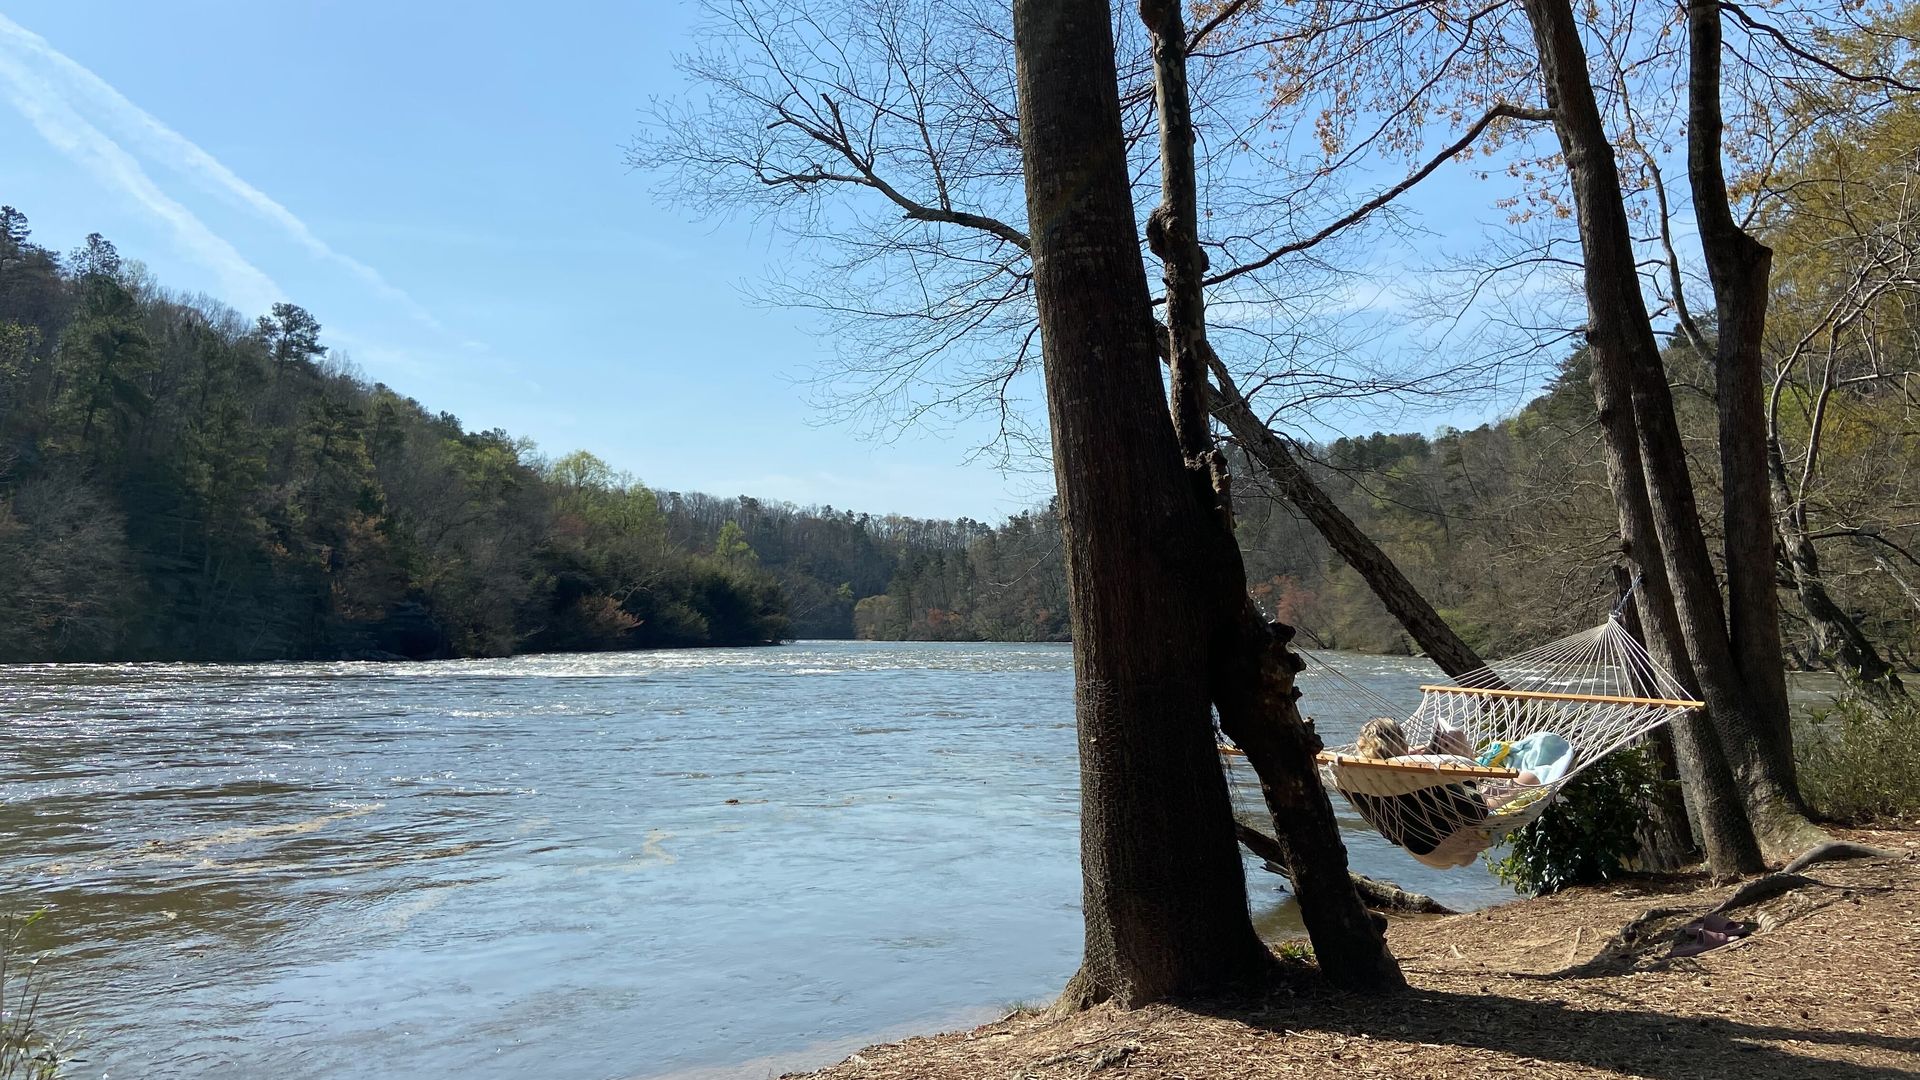 A person sits in a hammock on a sunny day alongside the Chattahoochee River